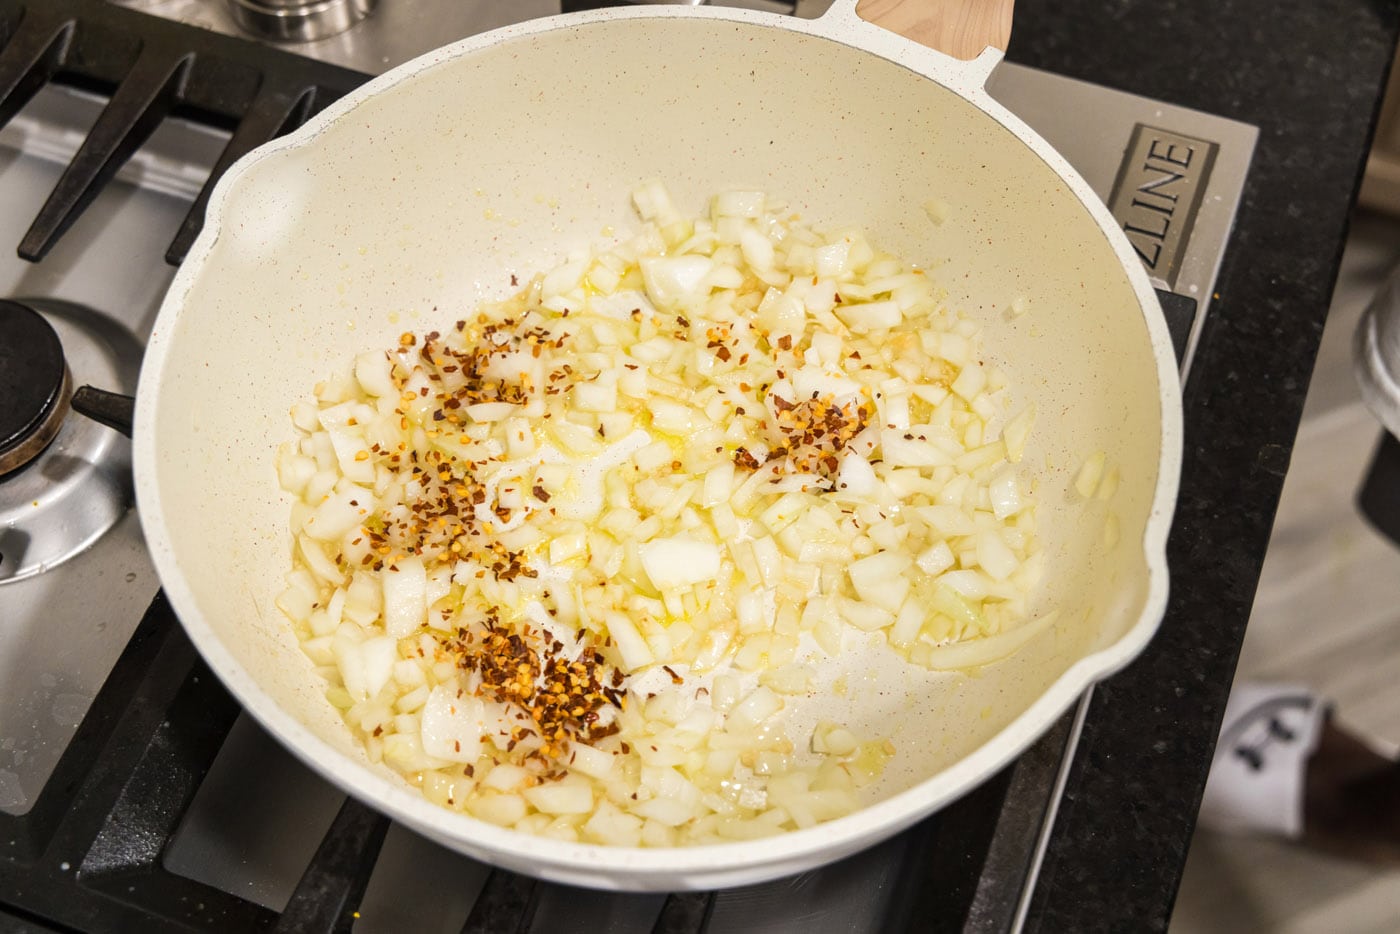 garlic, onion, and red pepper flakes in a skillet of oil